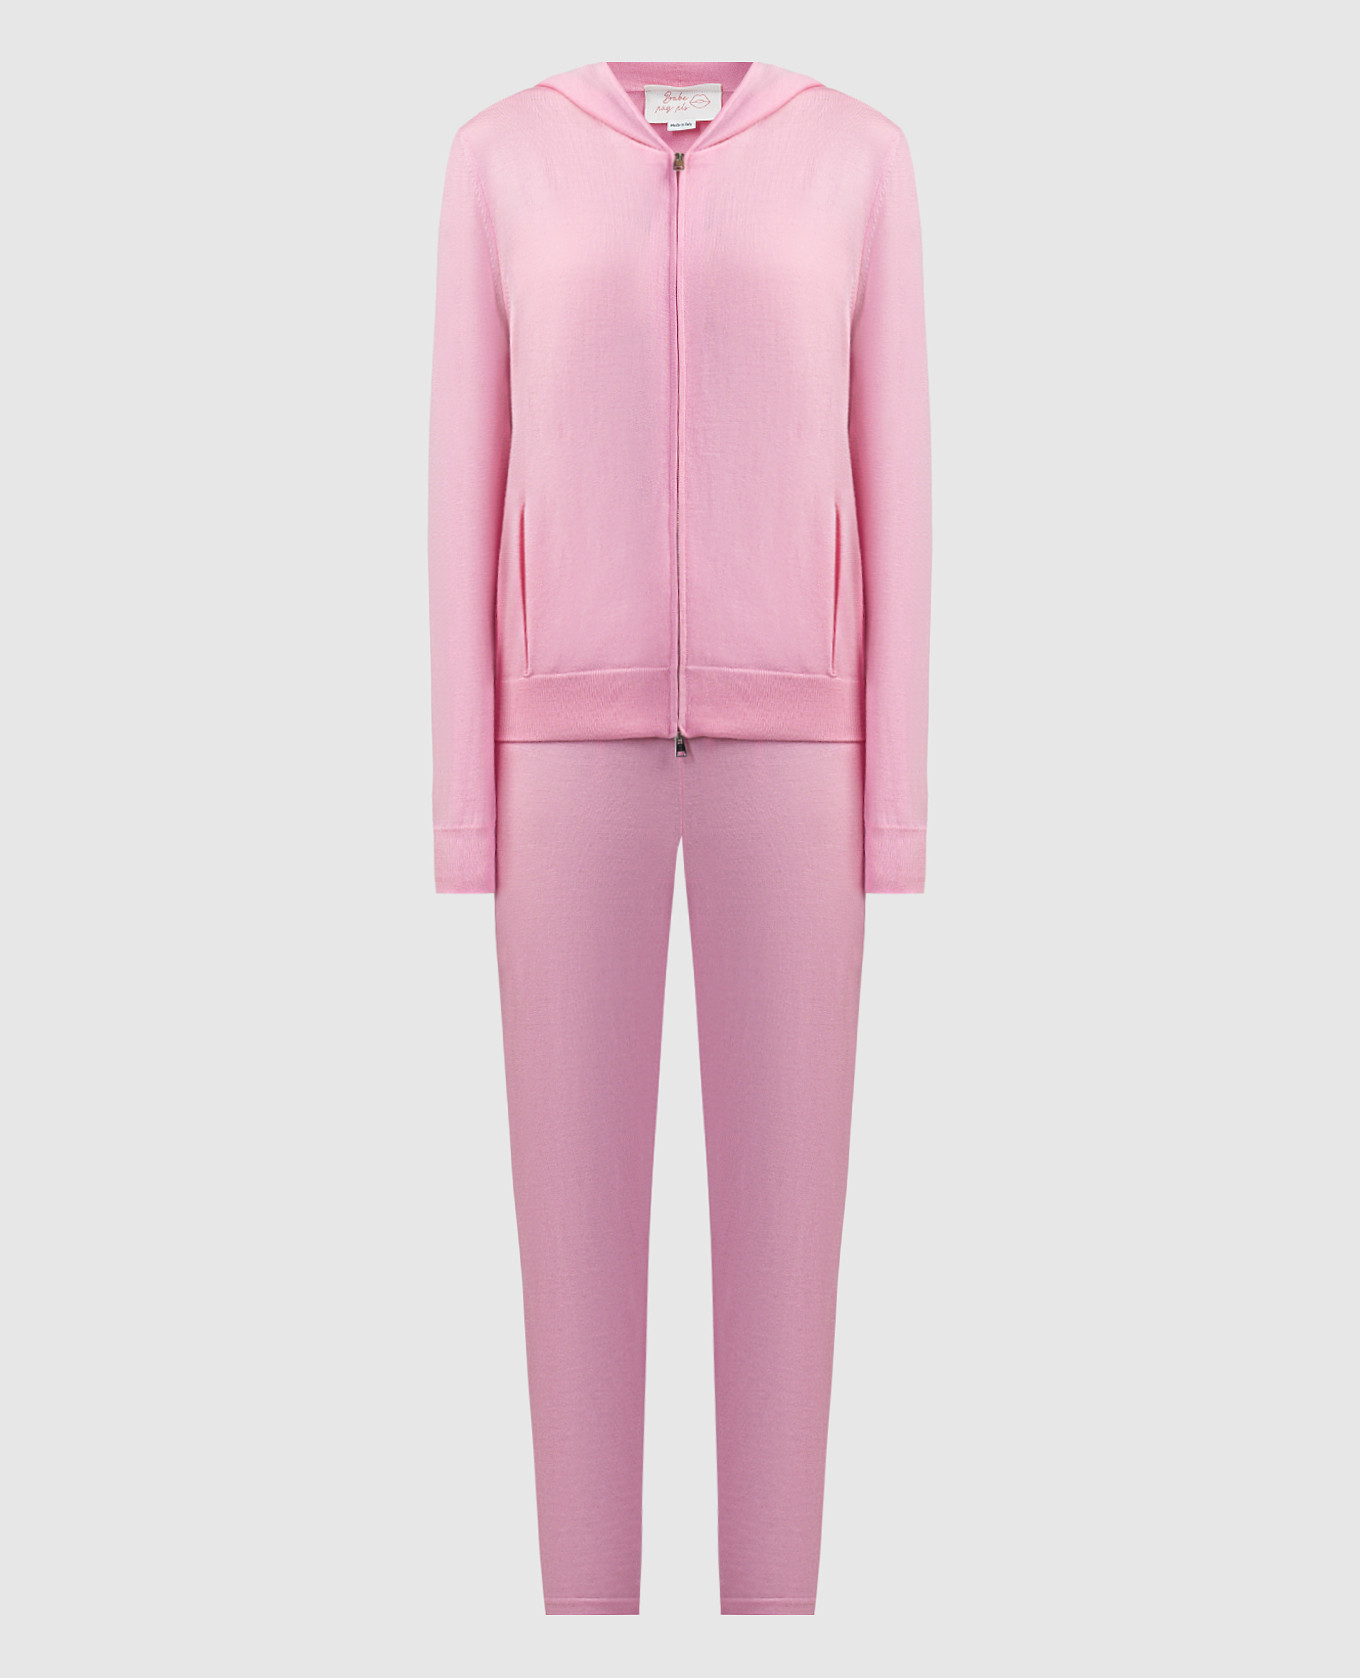 Pink sports suit made of wool